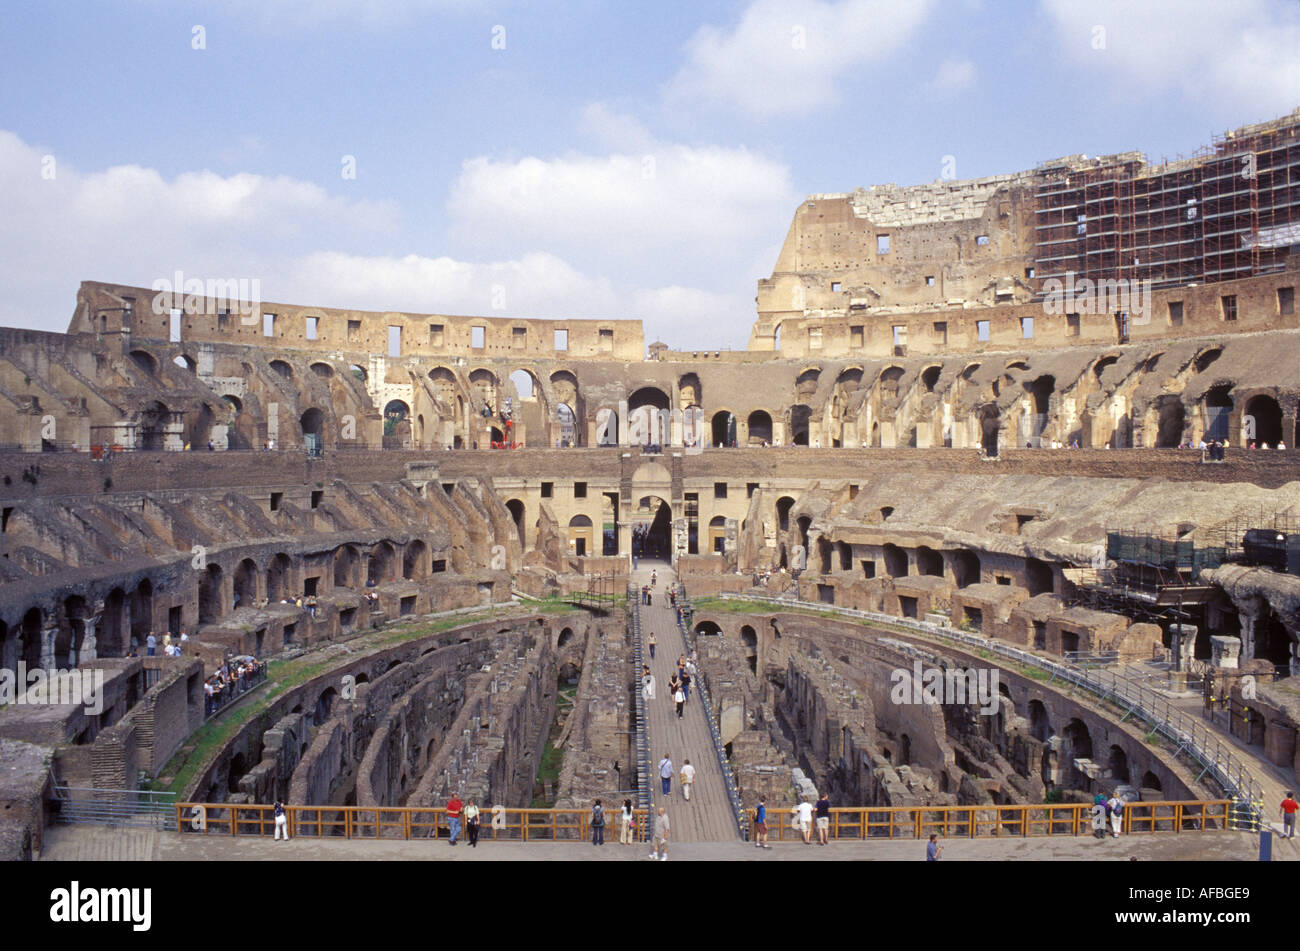 The ancient Colosseum in Rome Italy Stock Photo